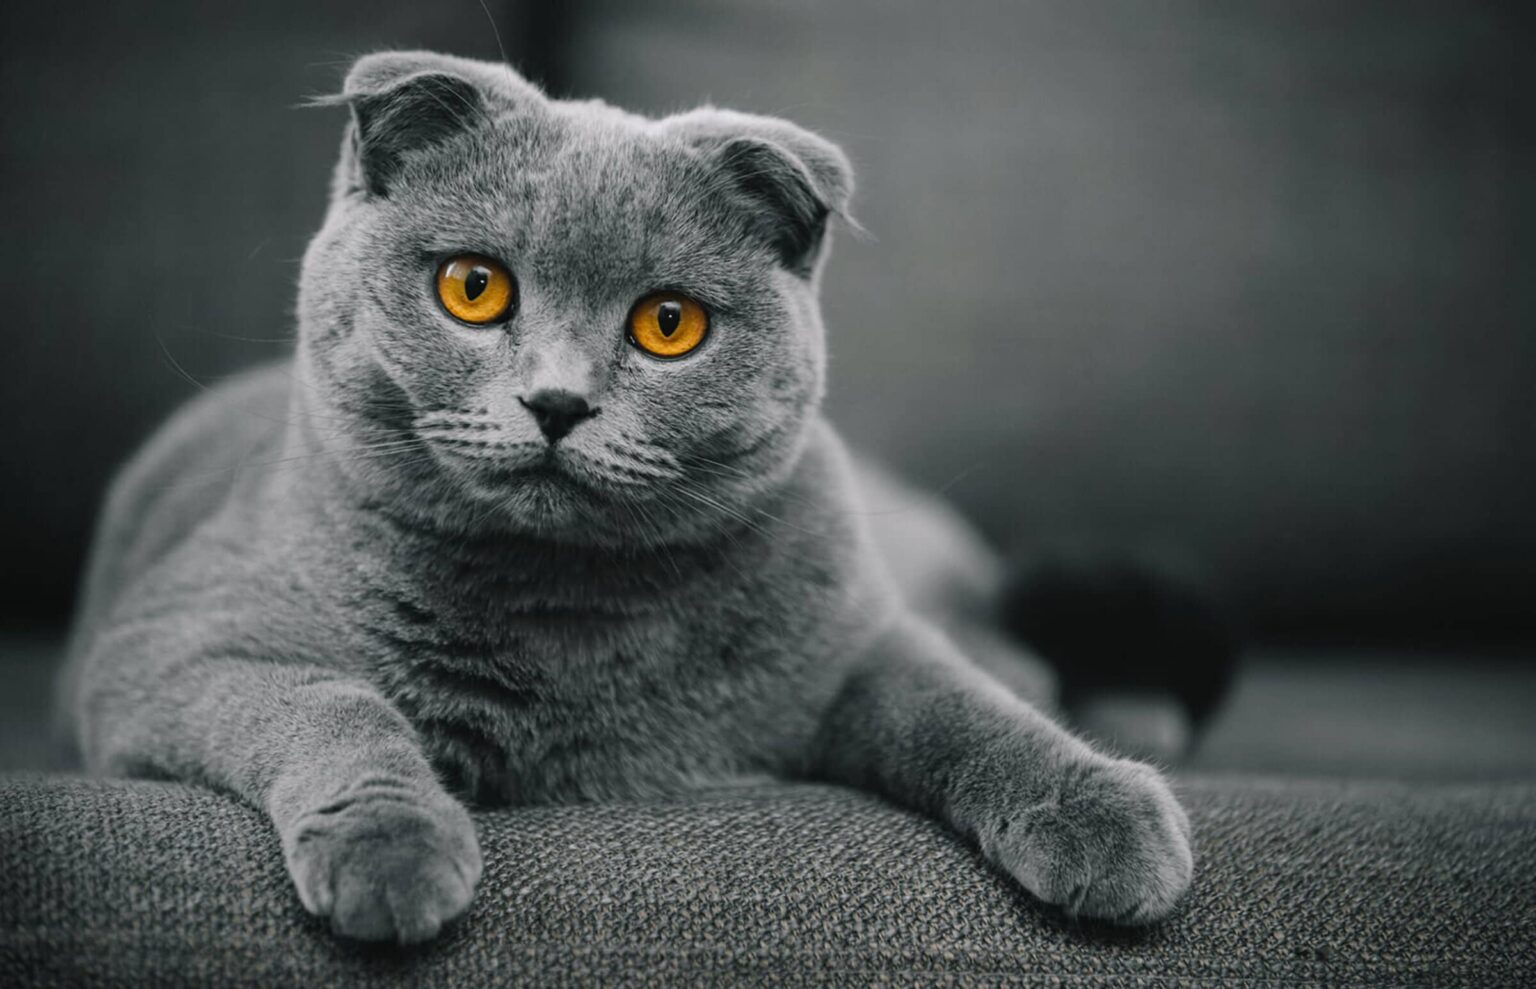 Have you ever heard of the Scottish Fold Munchkin cat? So, what’s going on with this guy? Grab your nearest furry friend and let’s find out! 